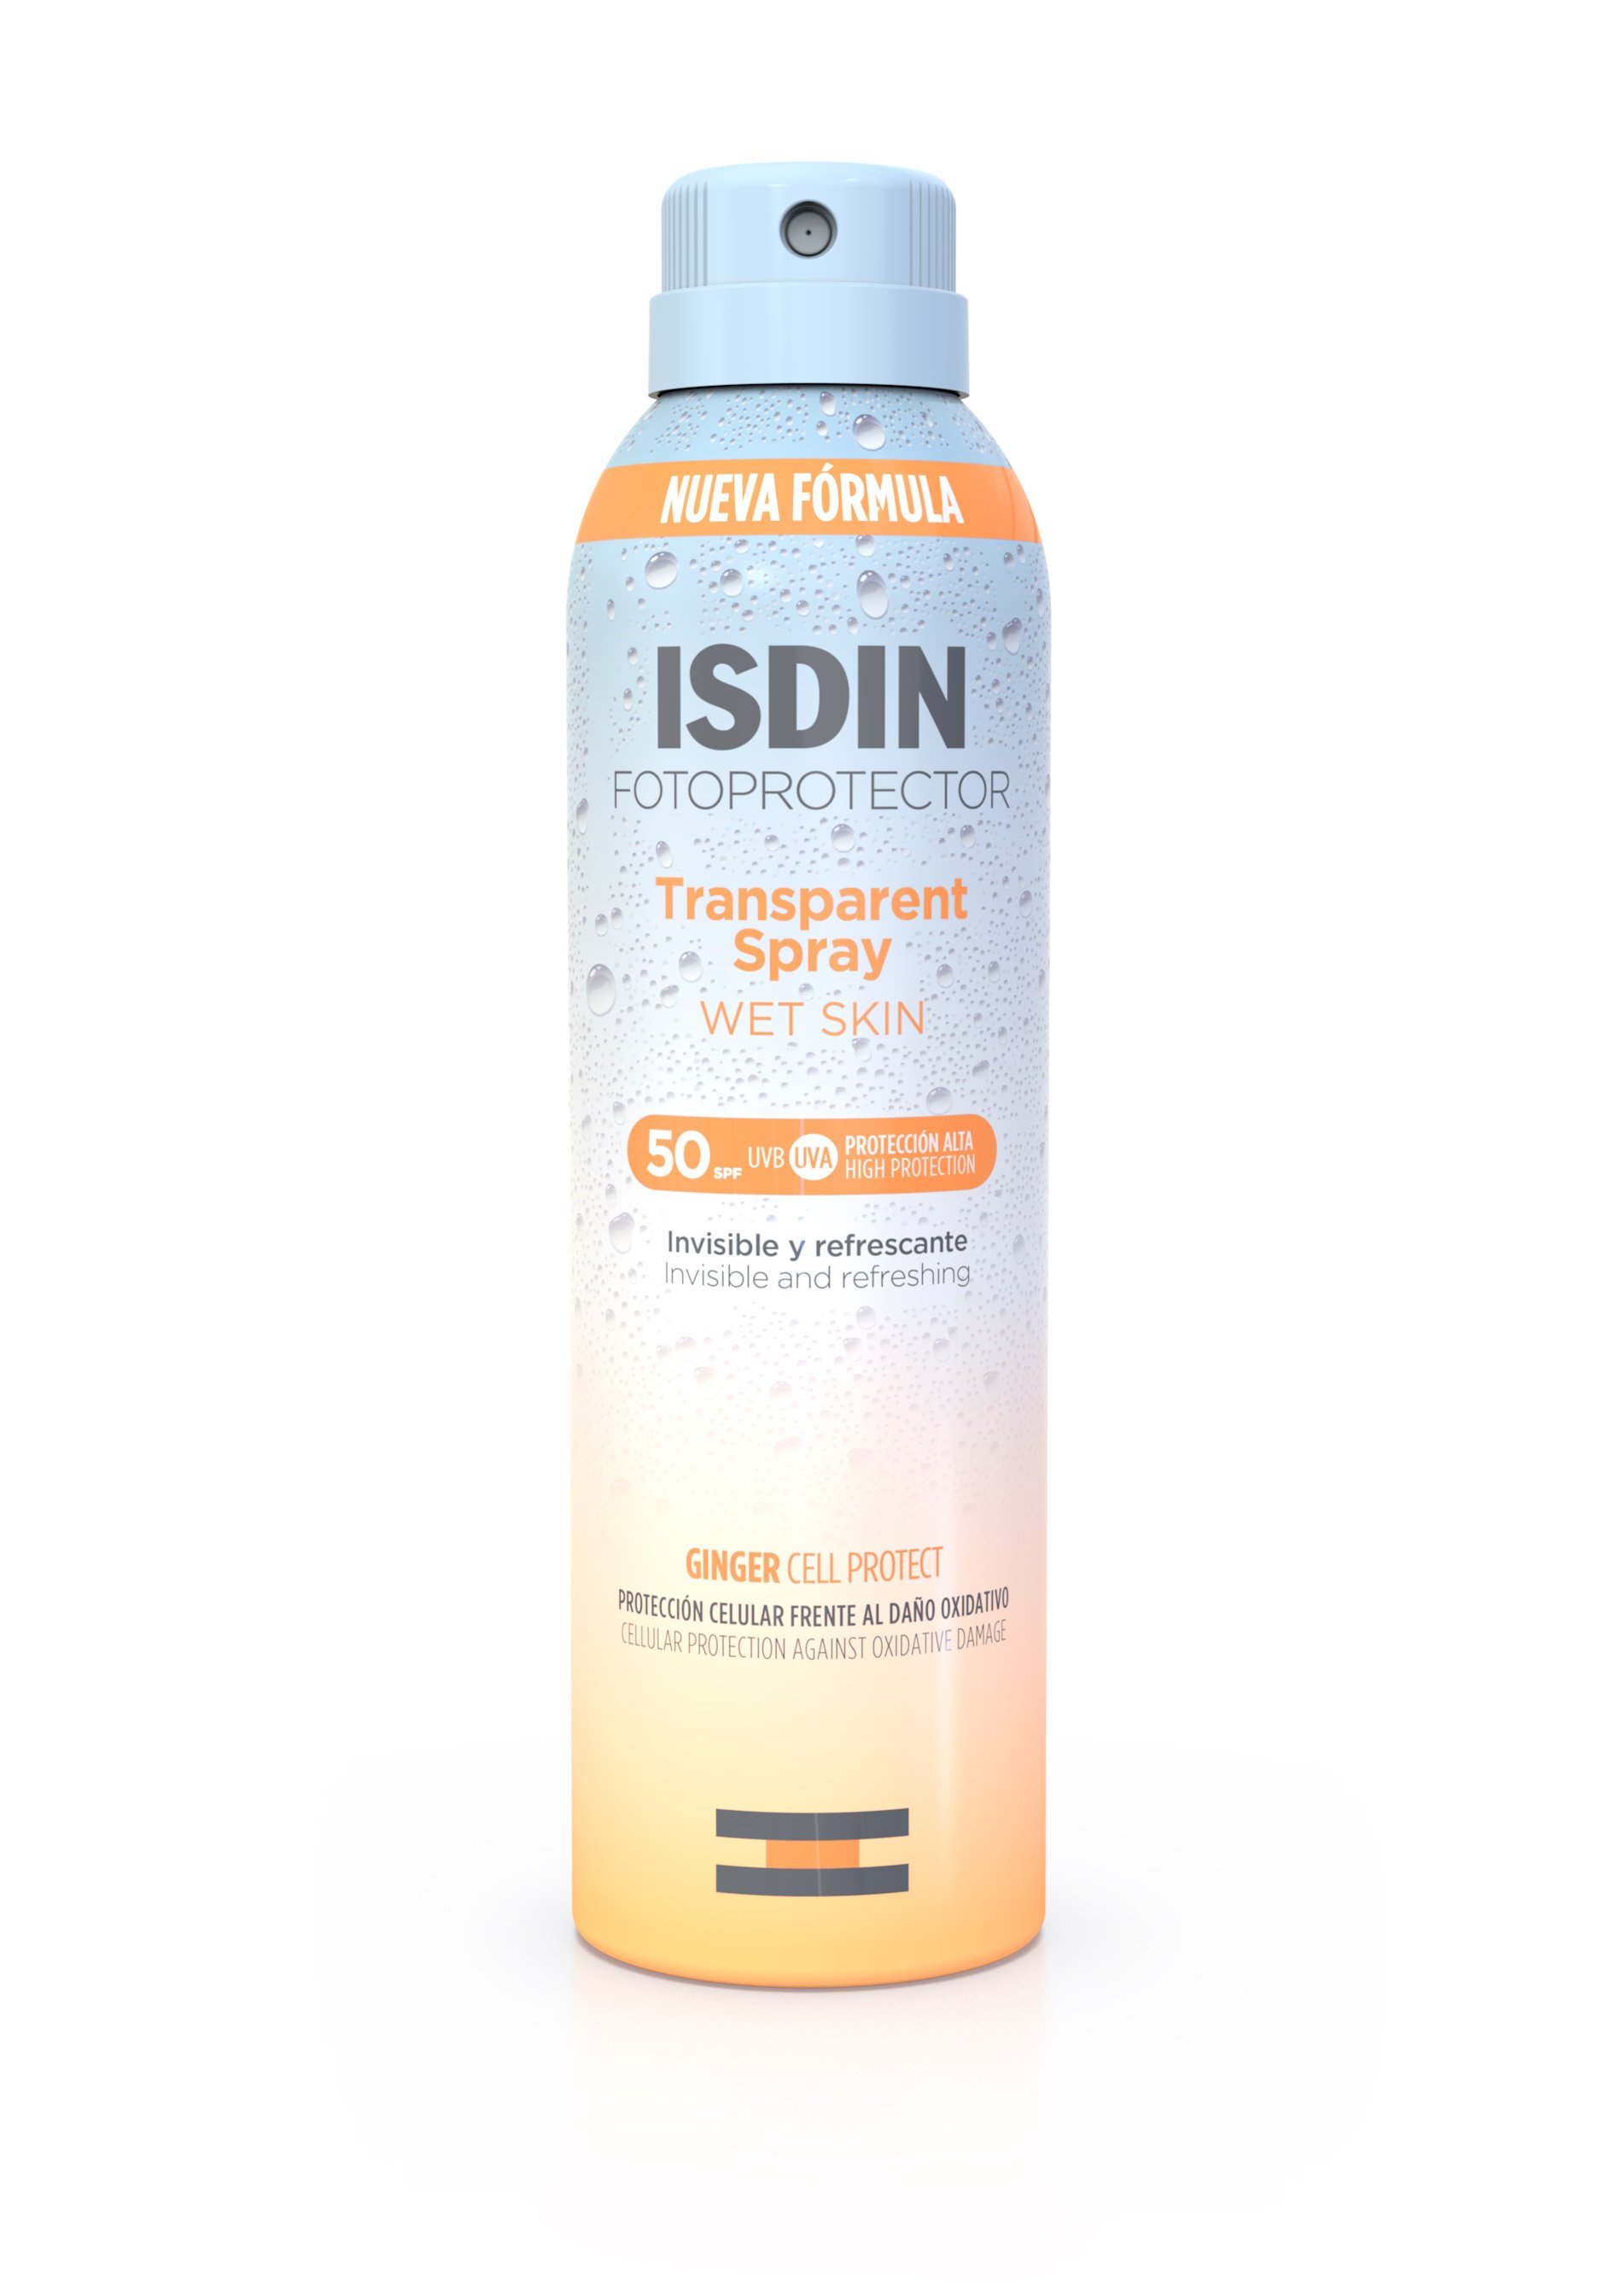 ISDIN Fotoprotector / Tinkle